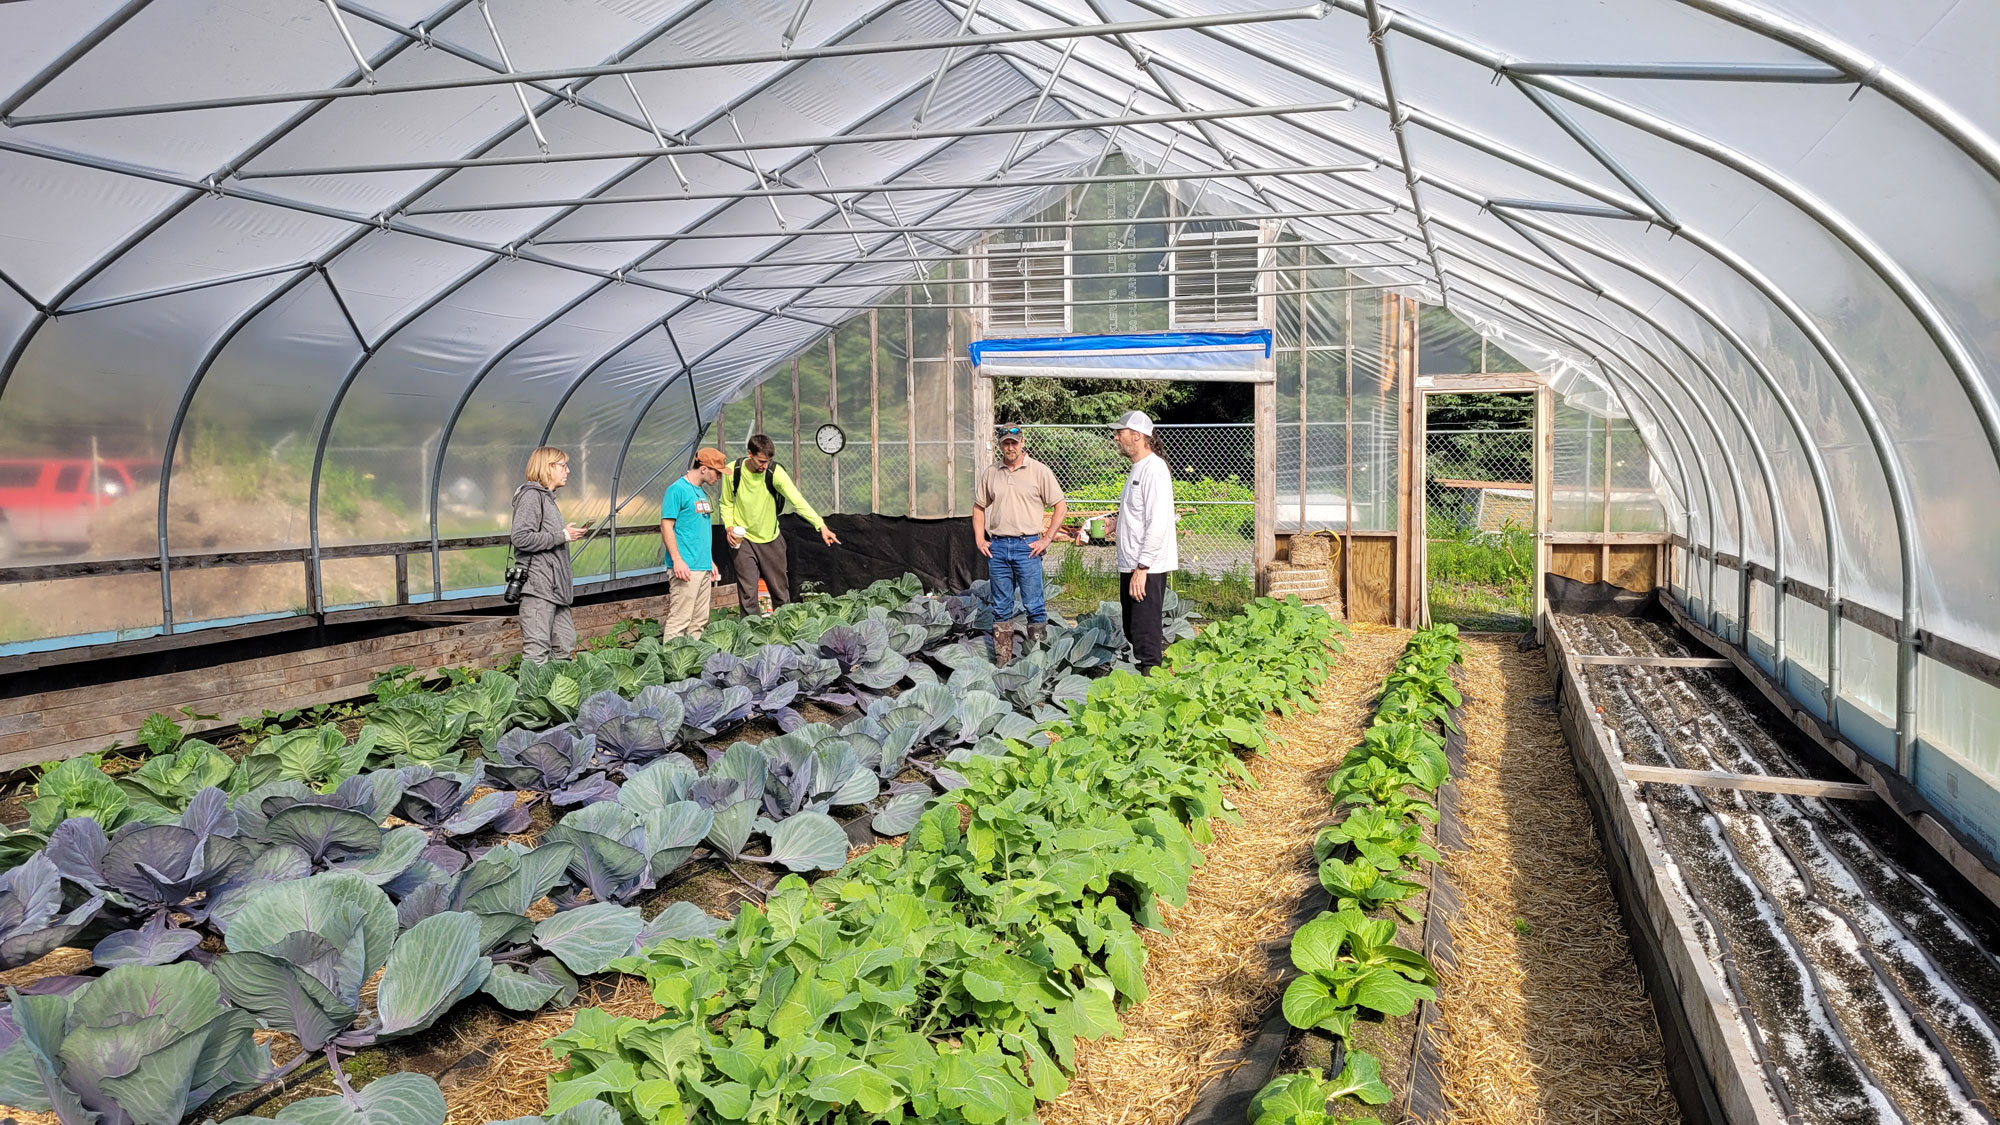 Staff from the USDA Natural Resources Conservation Service (NRCS) and the Kodiak Archipelago Leadership Institute (KALI) tour the Port Lions Farm in Port Lions, Alaska